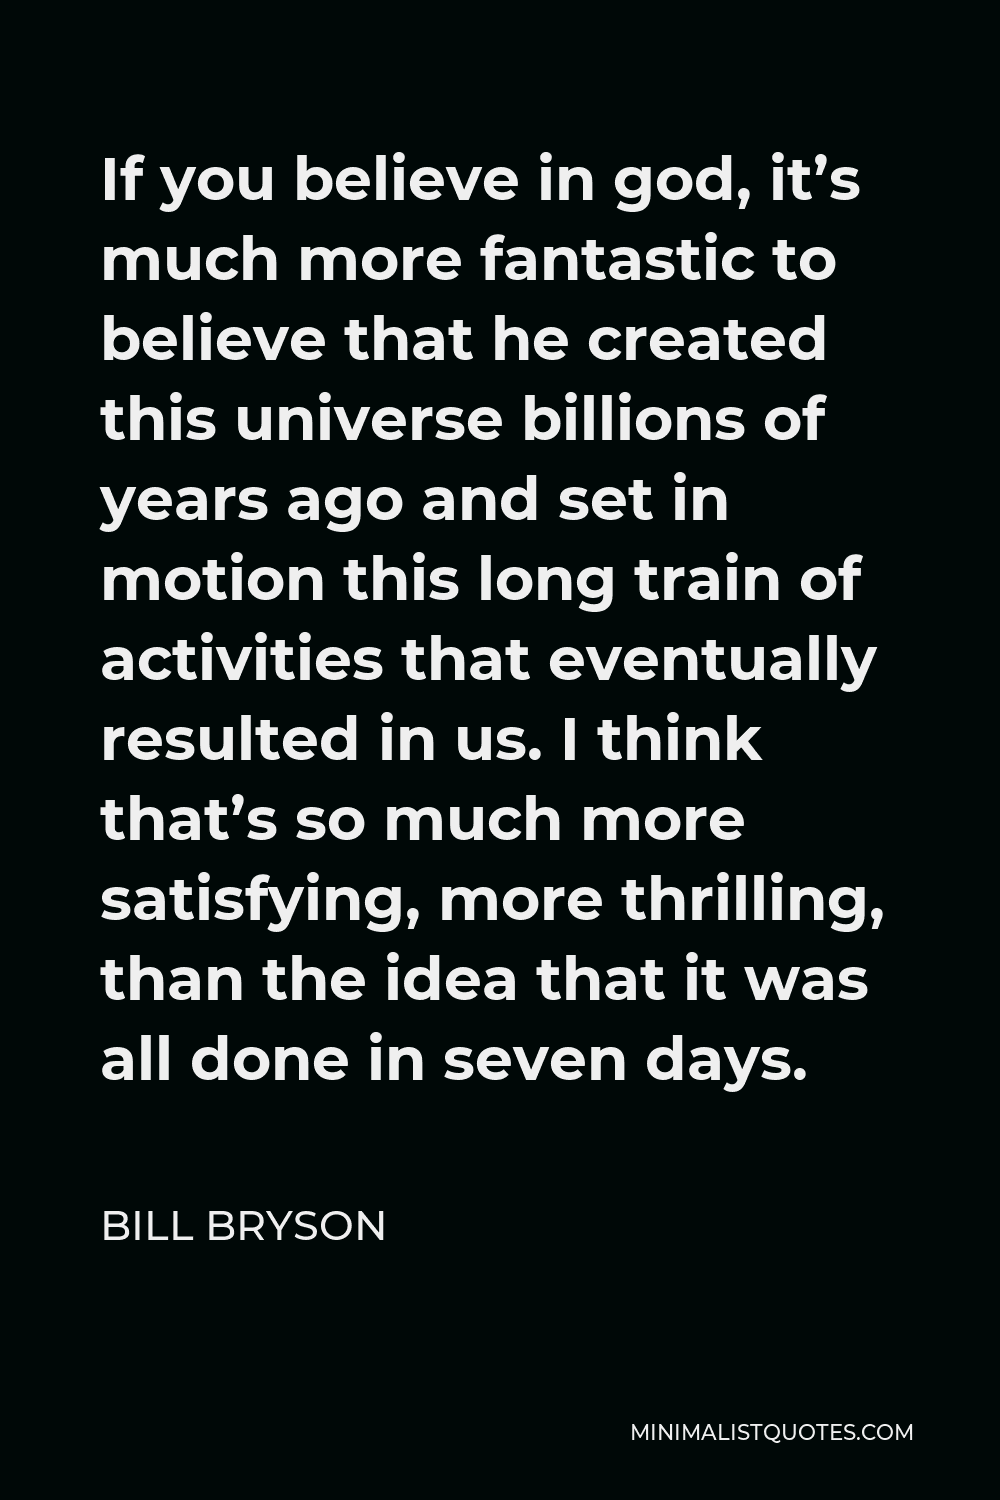 Bill Bryson Quote - If you believe in god, it’s much more fantastic to believe that he created this universe billions of years ago and set in motion this long train of activities that eventually resulted in us. I think that’s so much more satisfying, more thrilling, than the idea that it was all done in seven days.